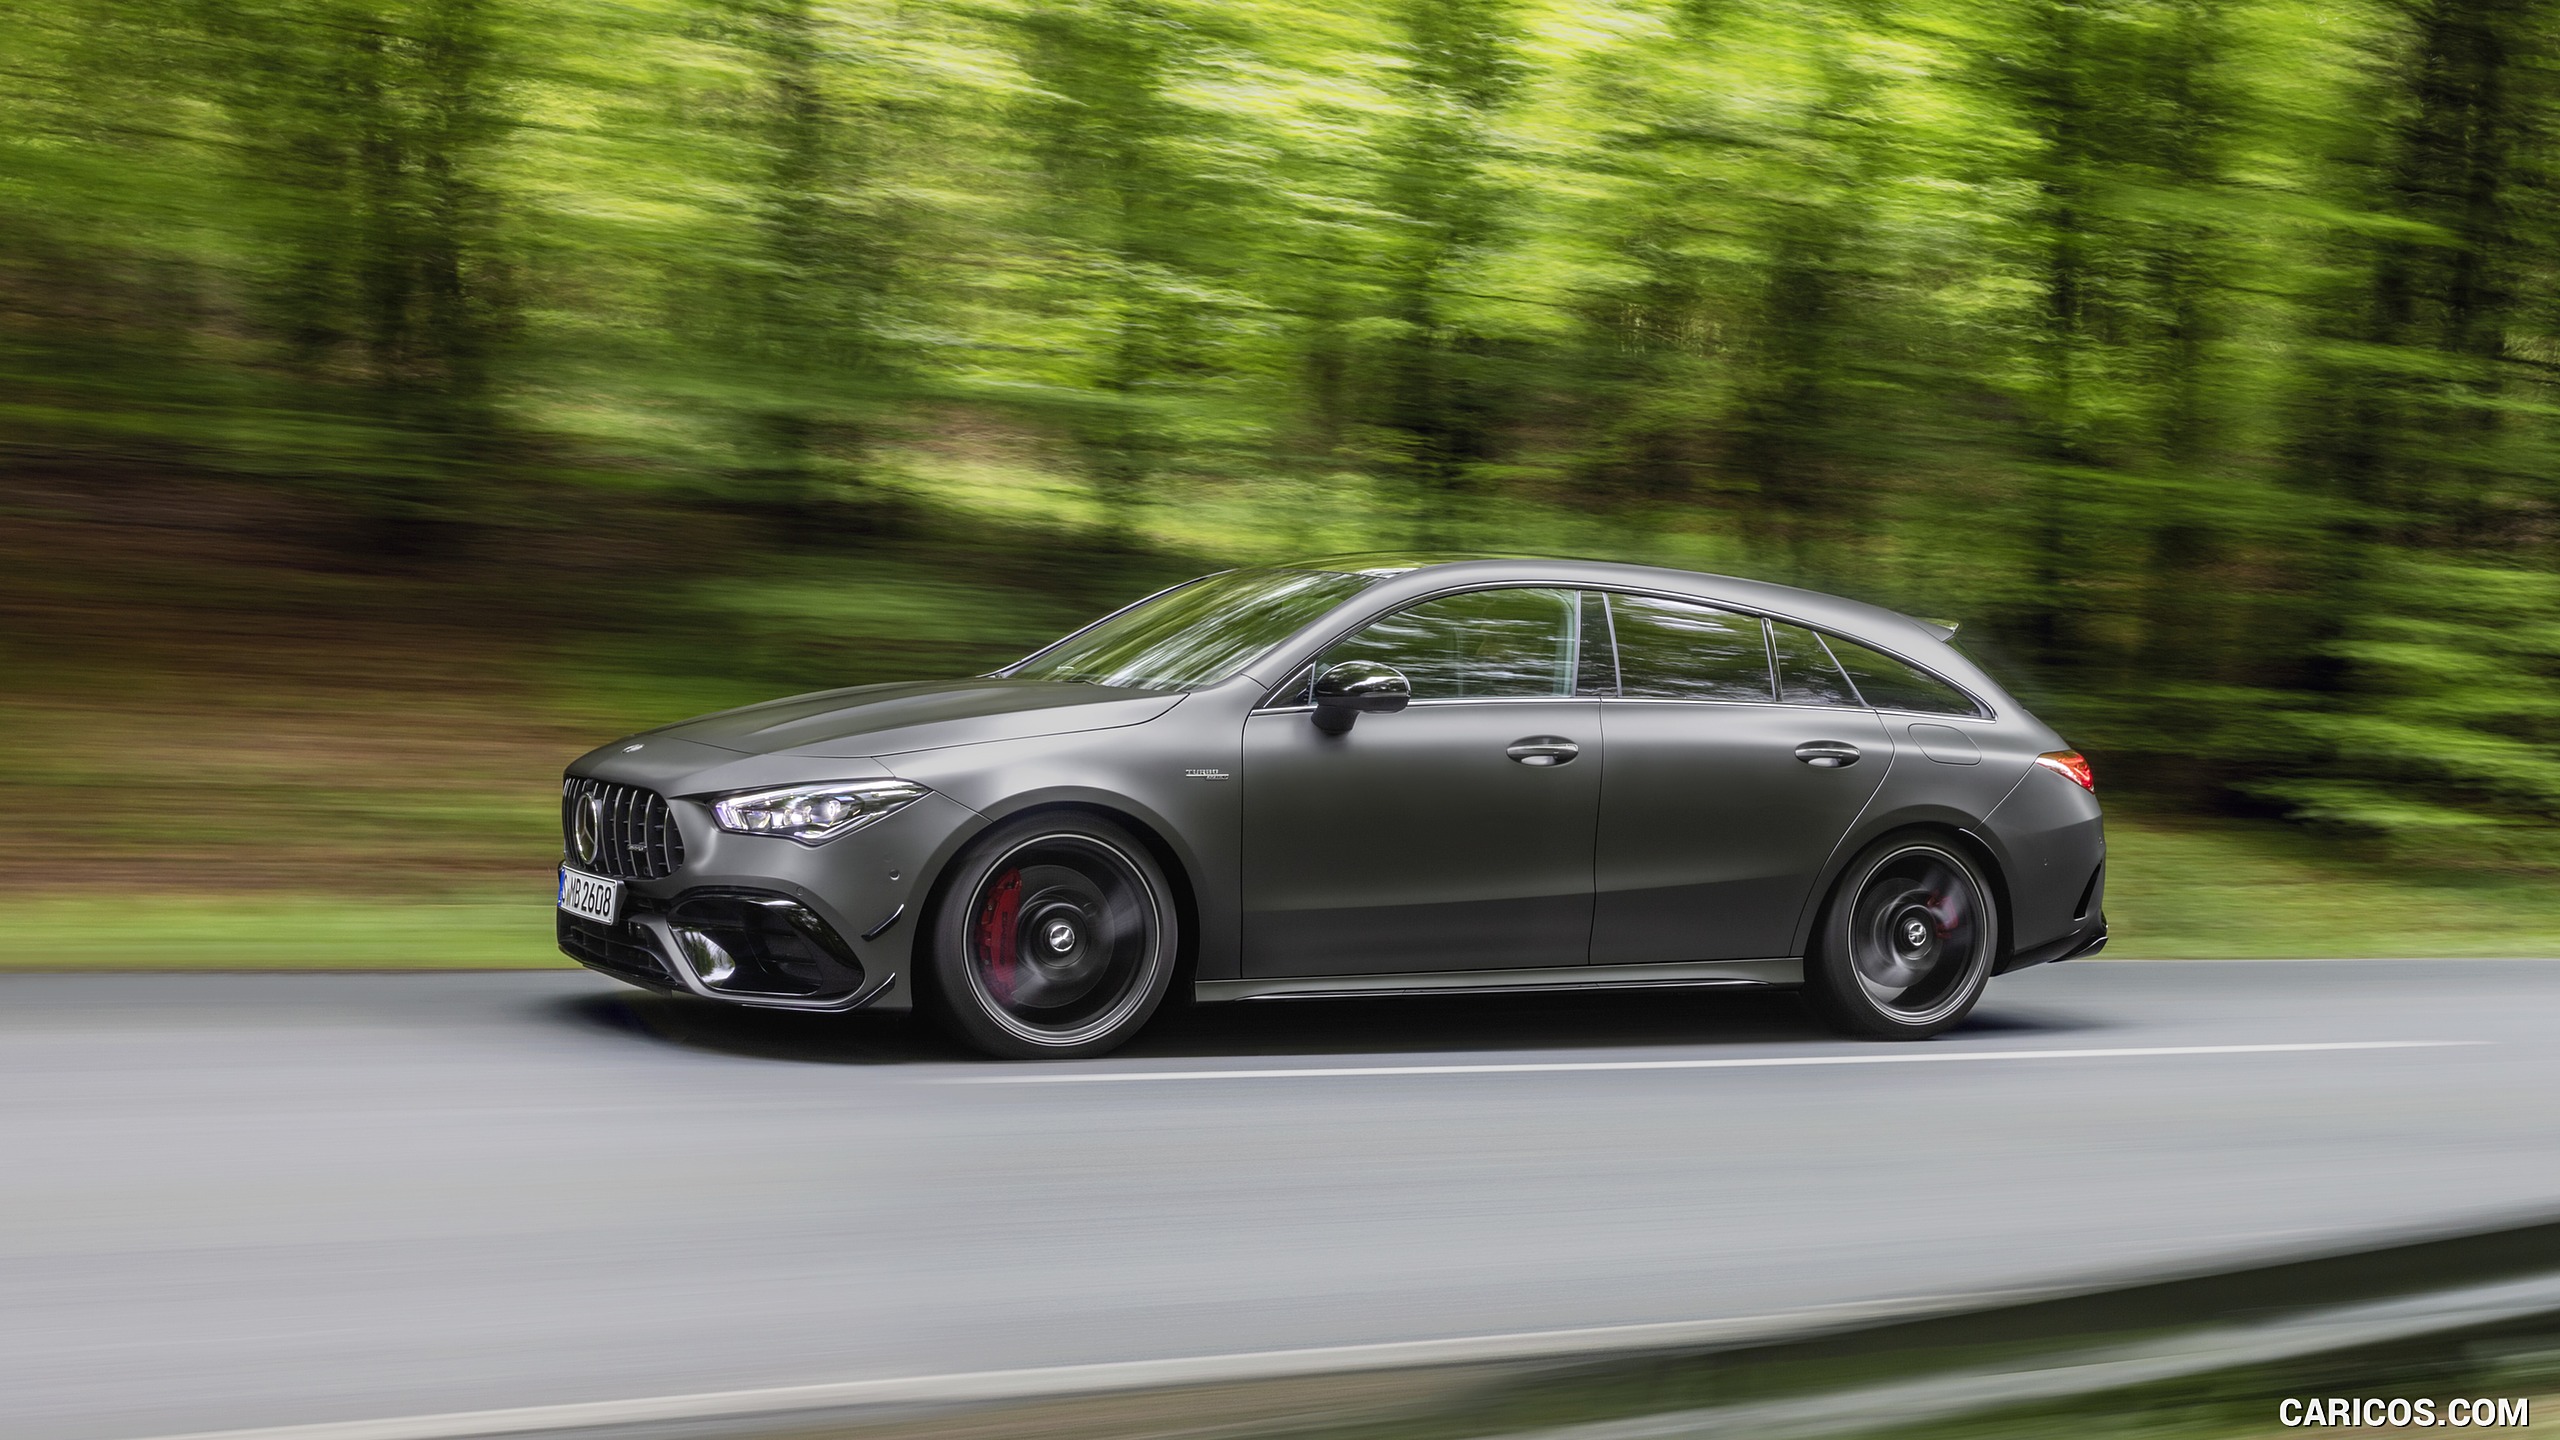 2020 Mercedes-AMG CLA 45 S 4MATIC+ Shooting Brake - Side, #3 of 35